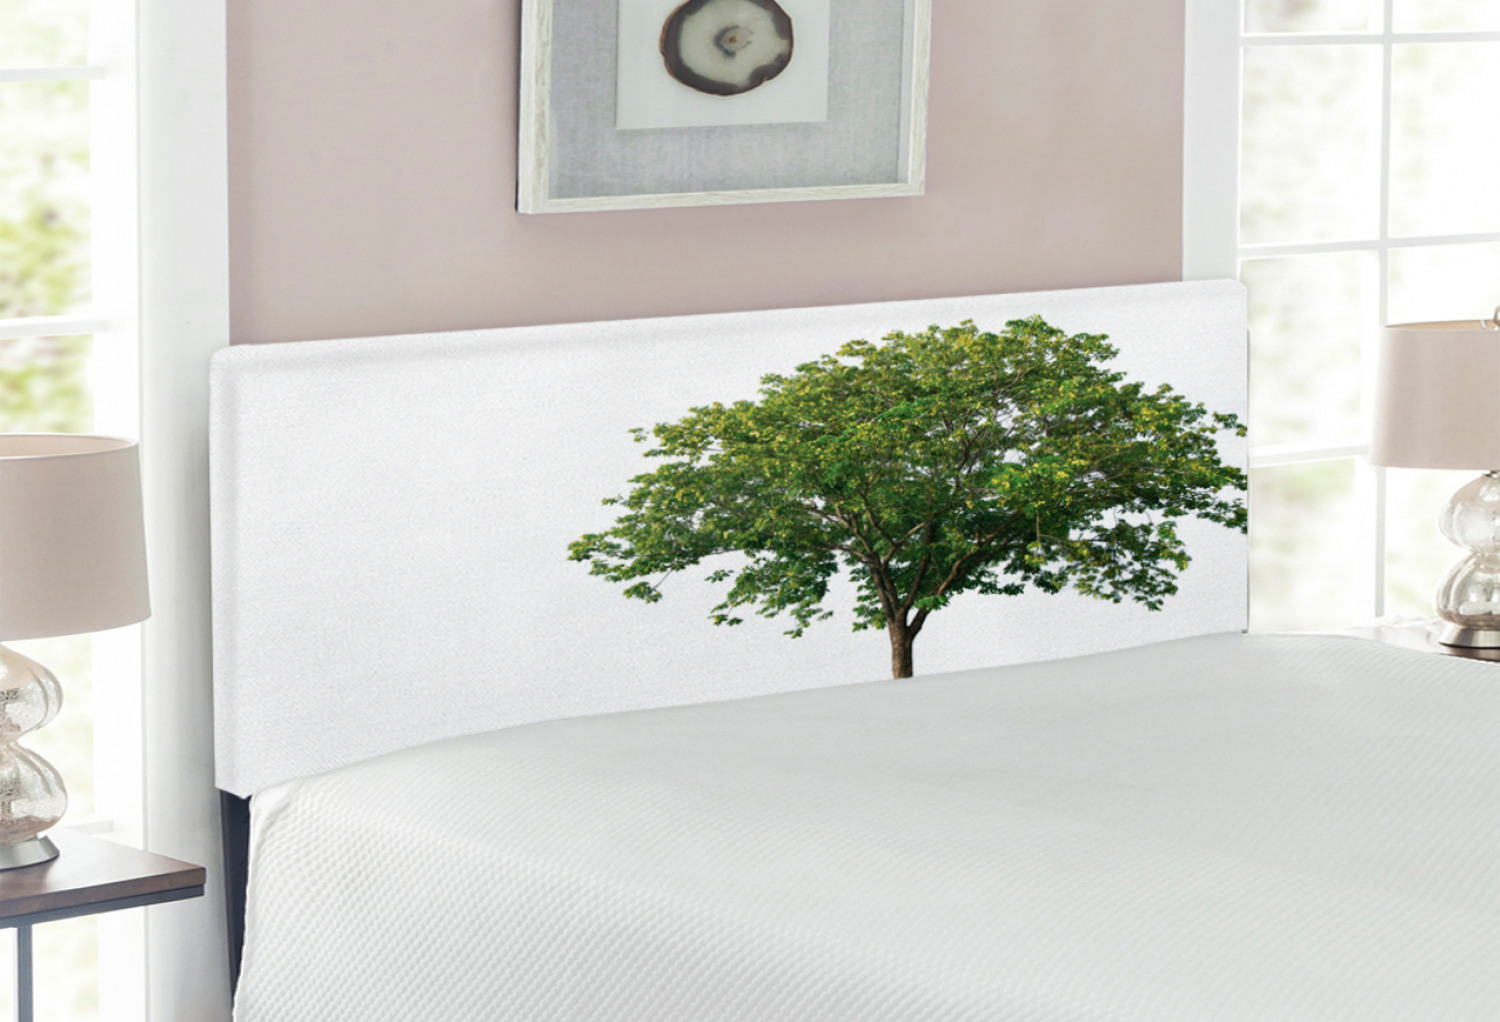 Tree Headboard, Bench Under Majestic Tree Looks Like Solitude in Habitat Environment Design, Upholstered Decorative Metal Bed Headboard with Memory Foam, Full Size, Green White, by Ambesonne - image 2 of 4